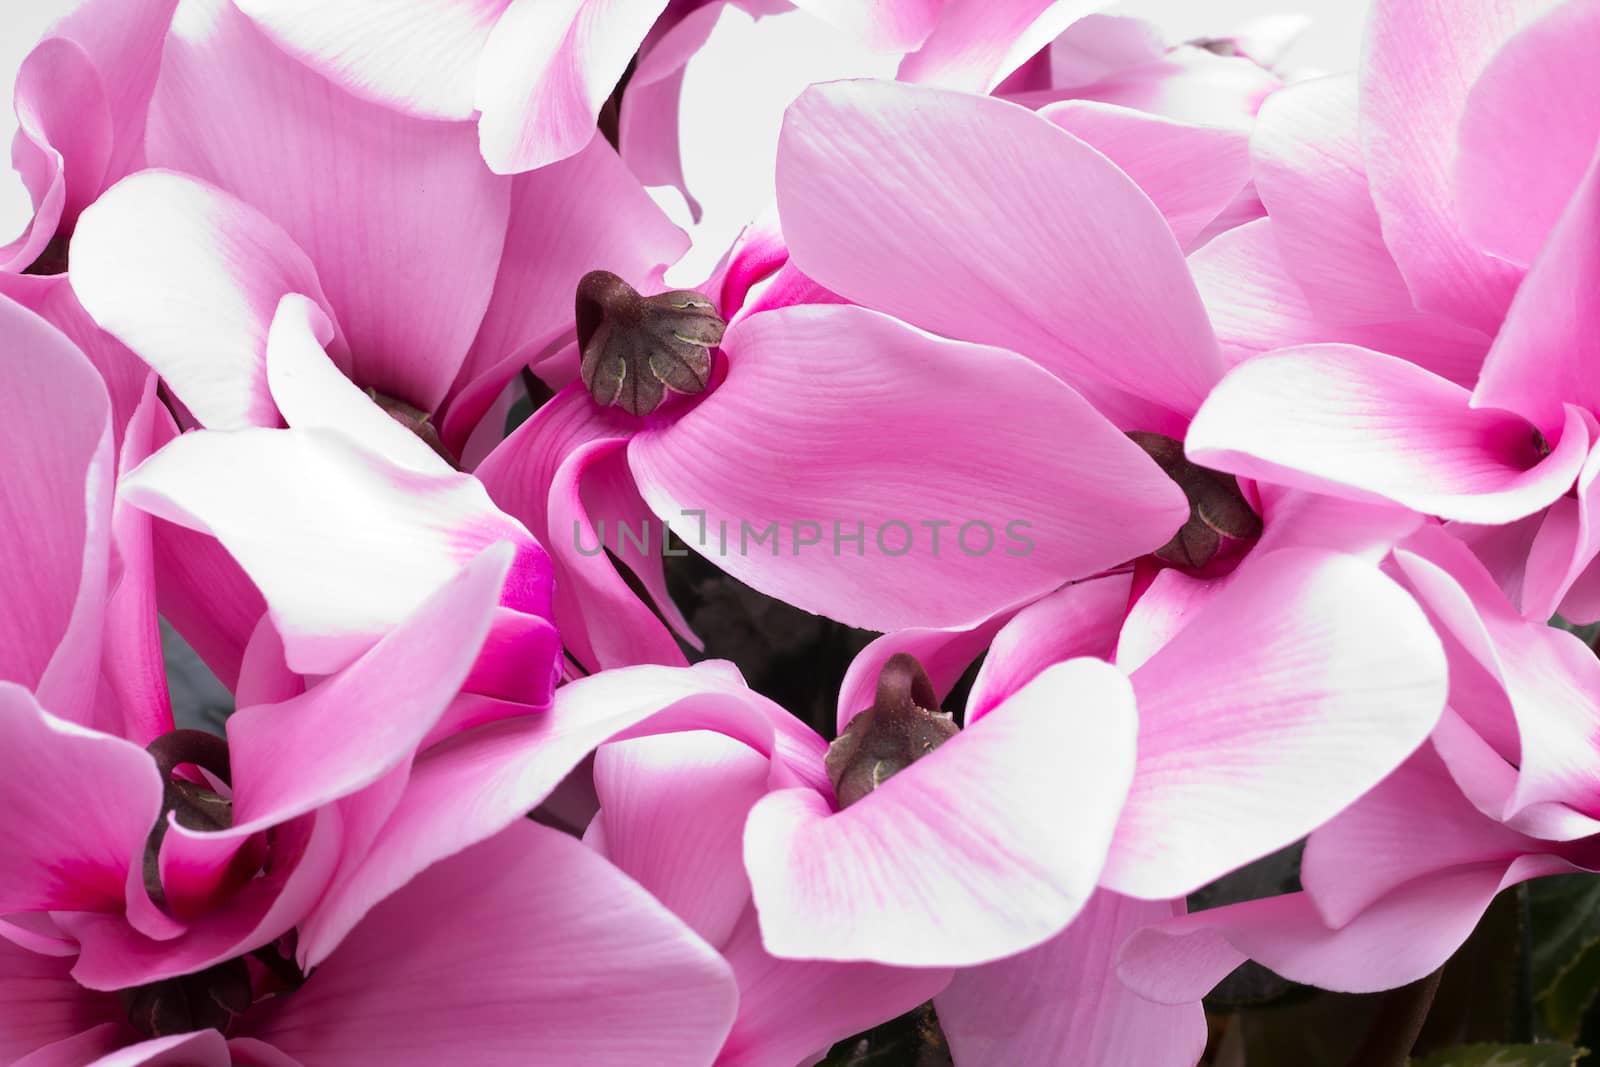 flowers of pink cyclamen - close up by mychadre77